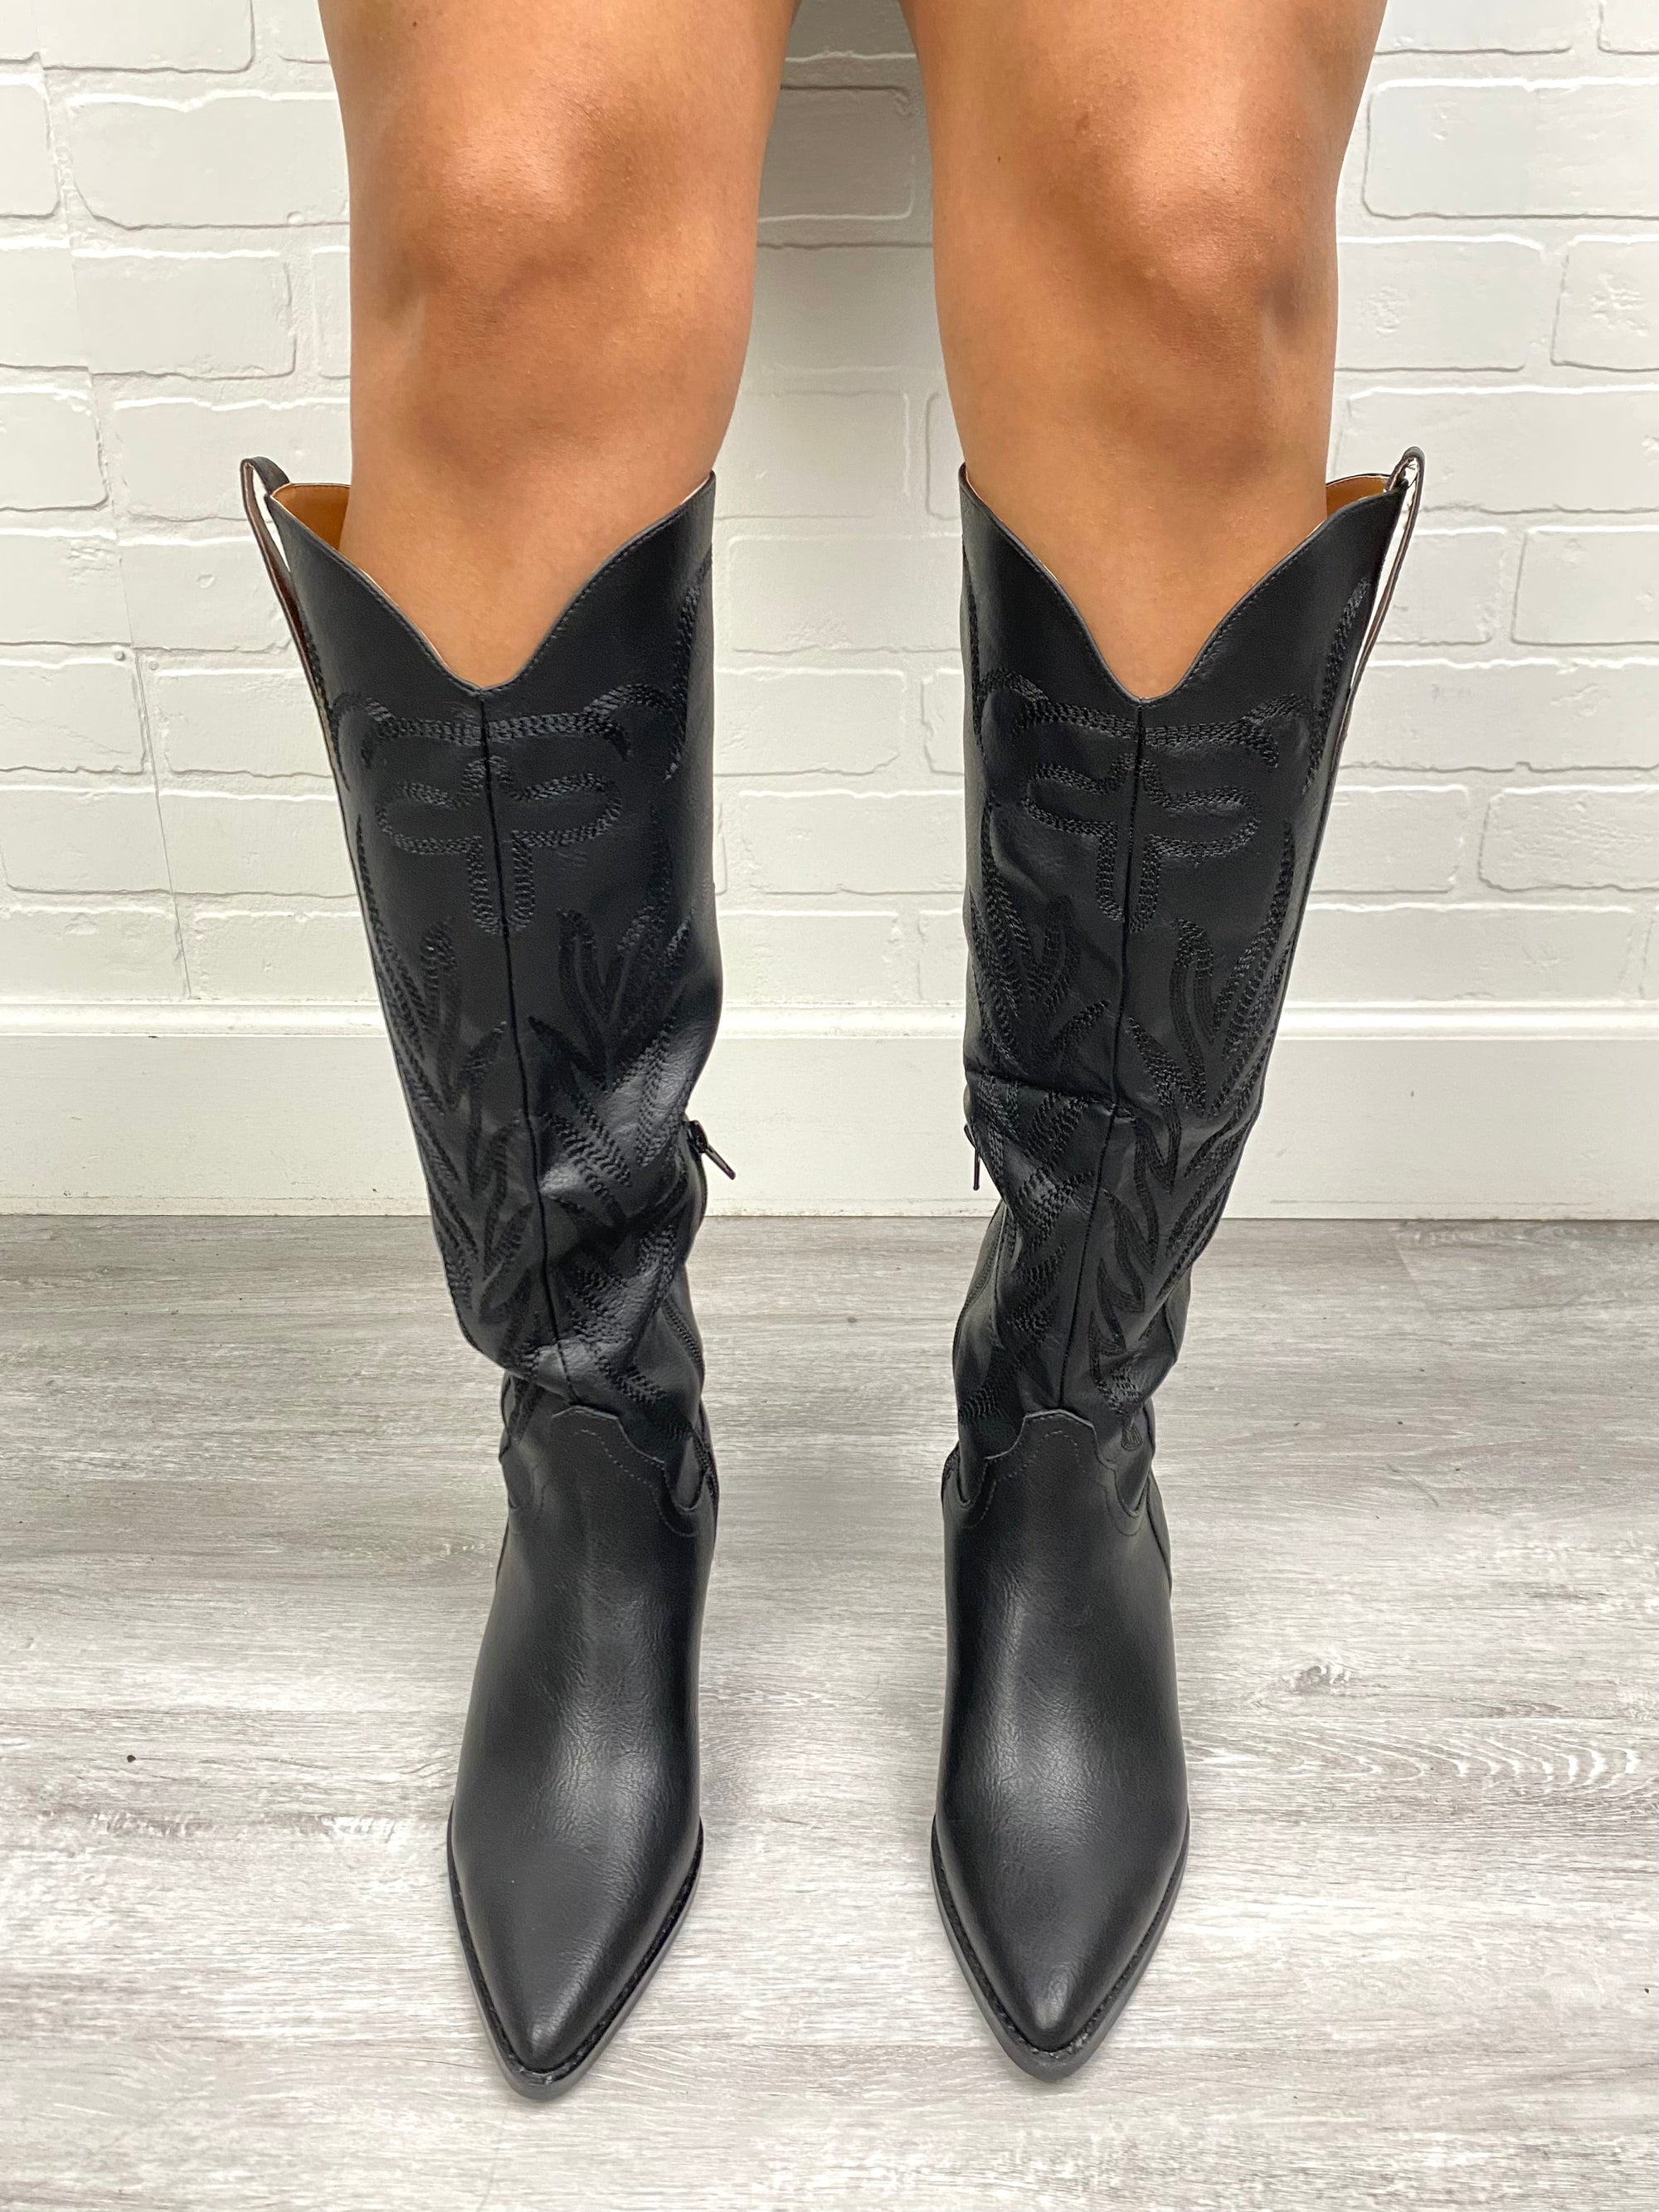 Samara cowboy boots black - Cute Shoes - Trendy Shoes at Lush Fashion Lounge Boutique in Oklahoma City